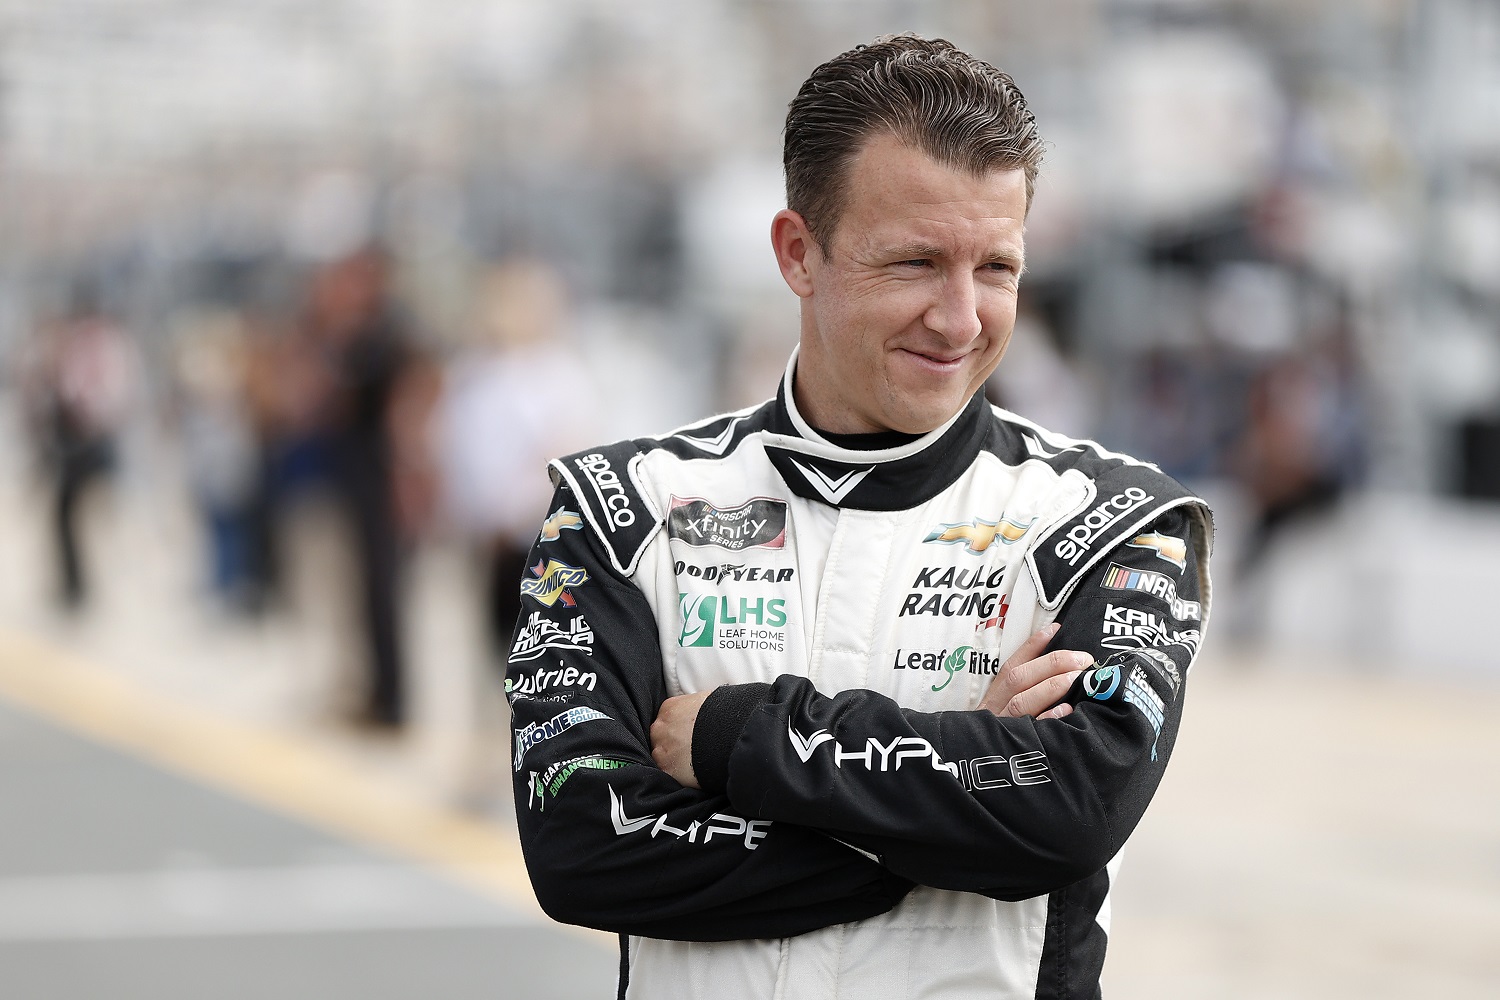 AJ Allmendinger waits on the grid during qualifying for the NASCAR Xfinity Series Alsco Uniforms 300 at Charlotte Motor Speedway on May 29, 2021.